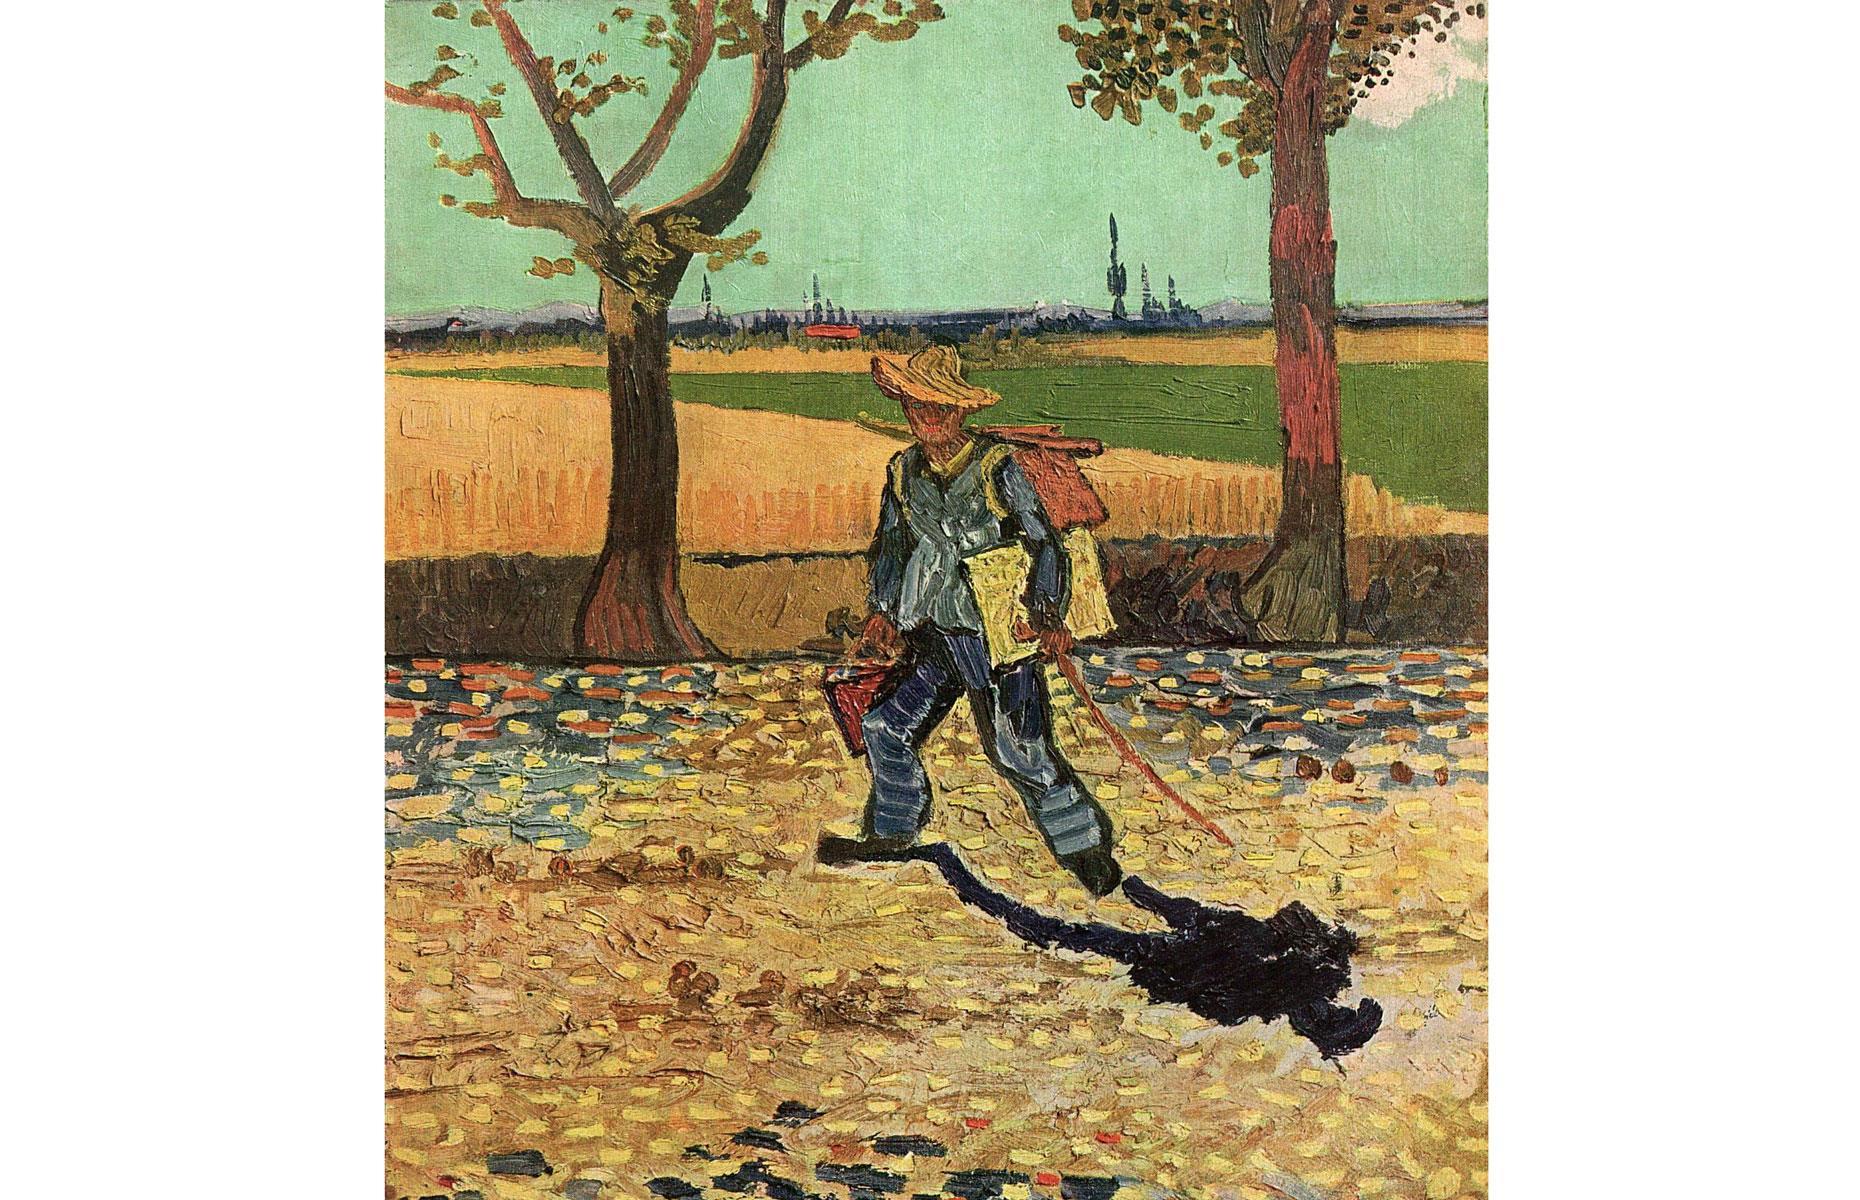 Van Gogh's The Painter on his Way to Work